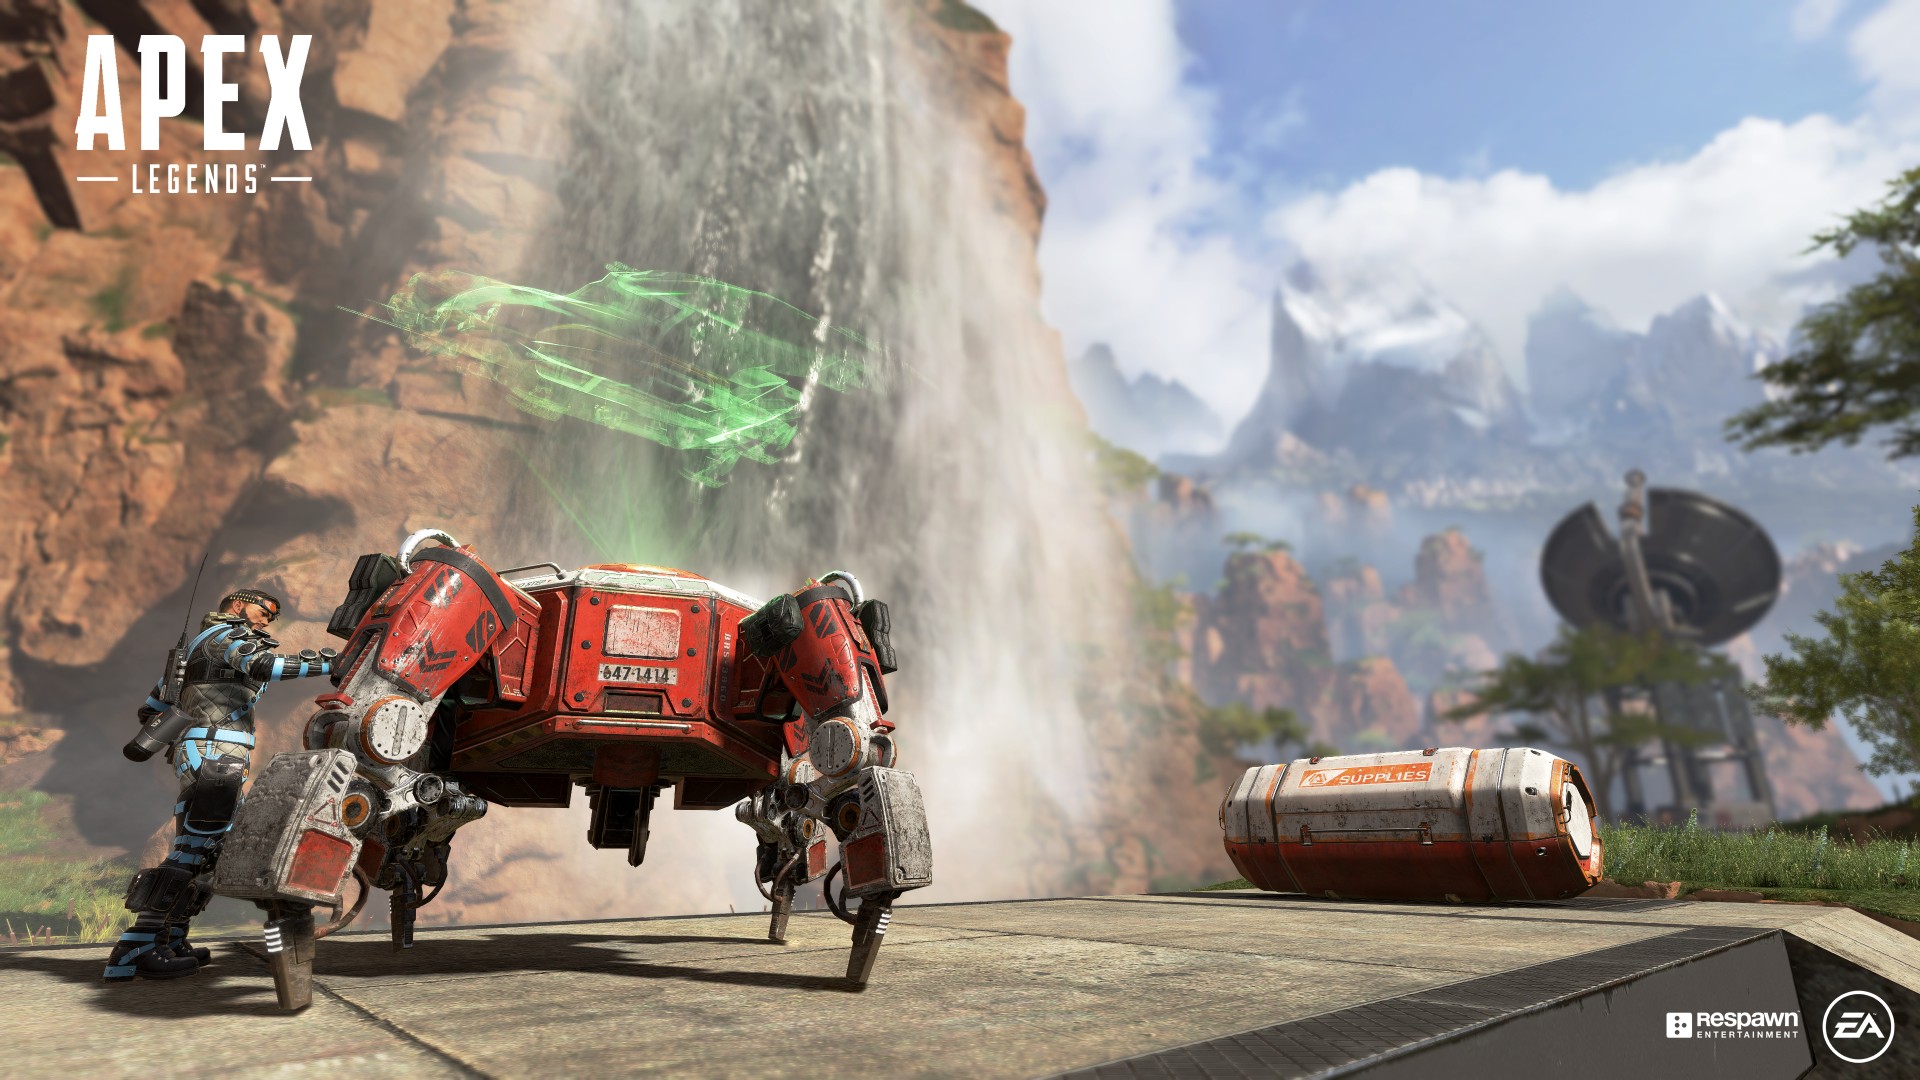 Play Apex Legends for free now on Xbox One RespawnBeacon_v01.jpg